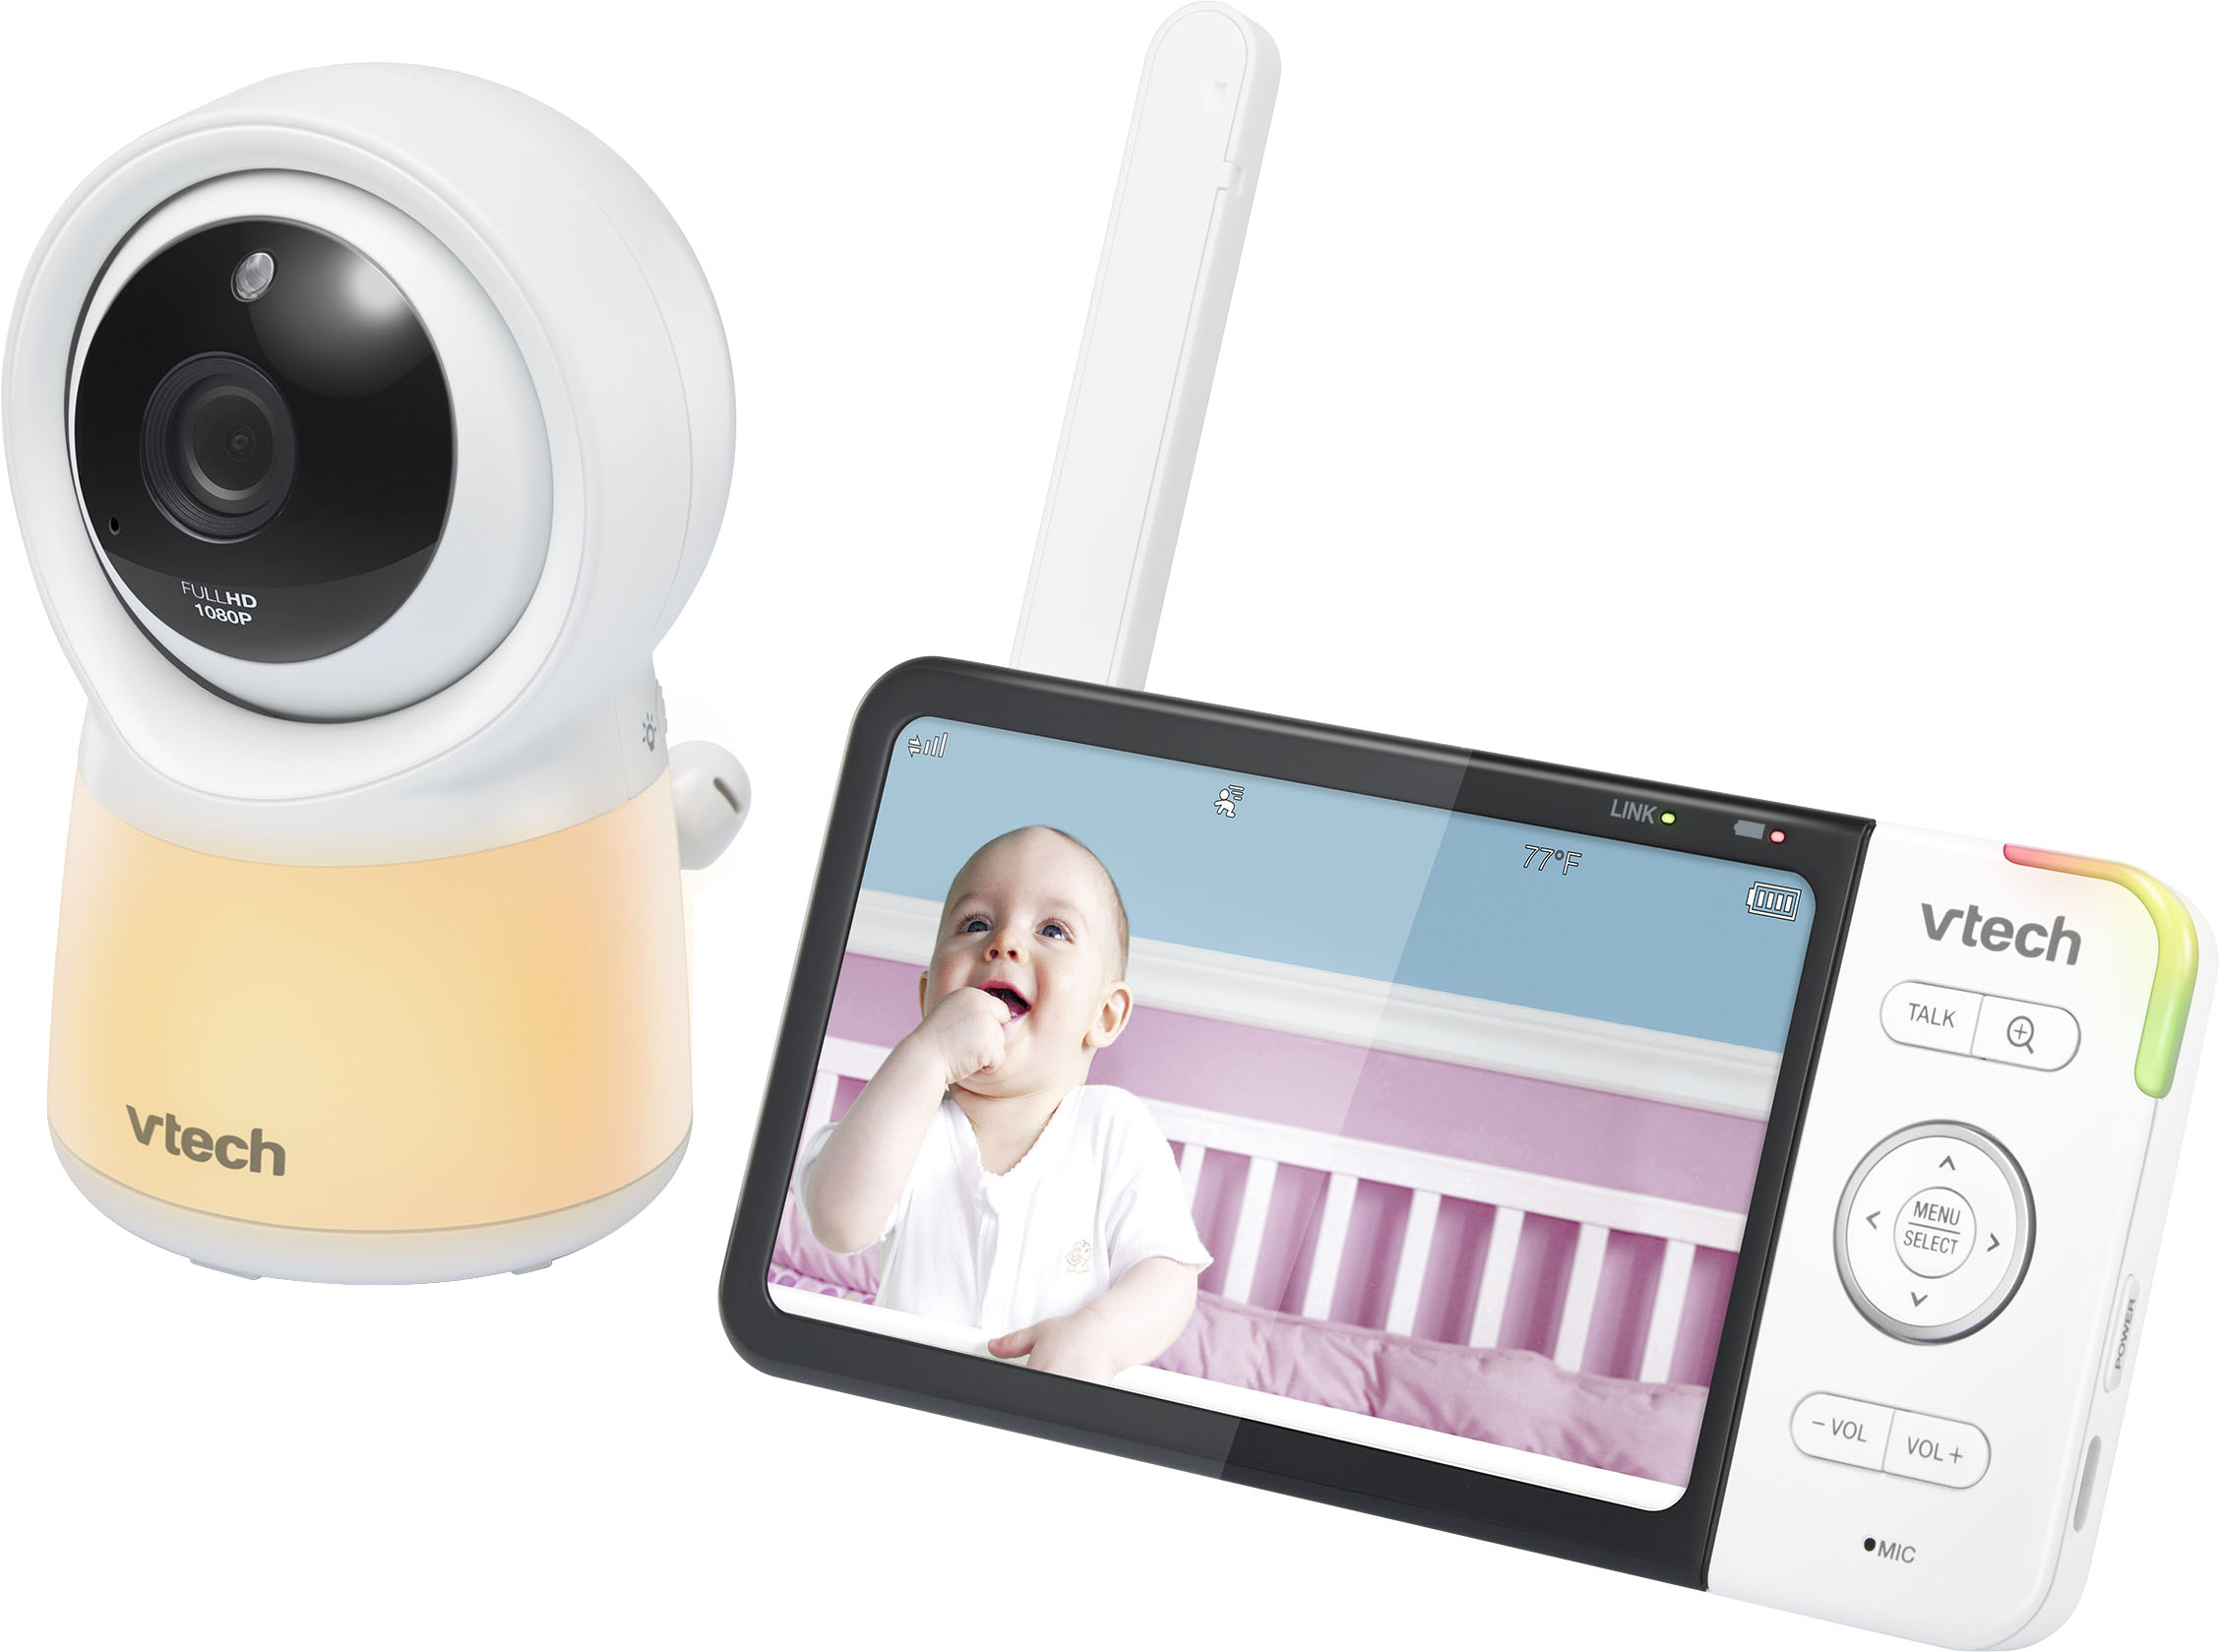 Angle View: VTech - Smart Wi-Fi Video Baby Monitor w/ 5” HC Display and 1080p HD Camera, Built-in night light, RM5754HD - White